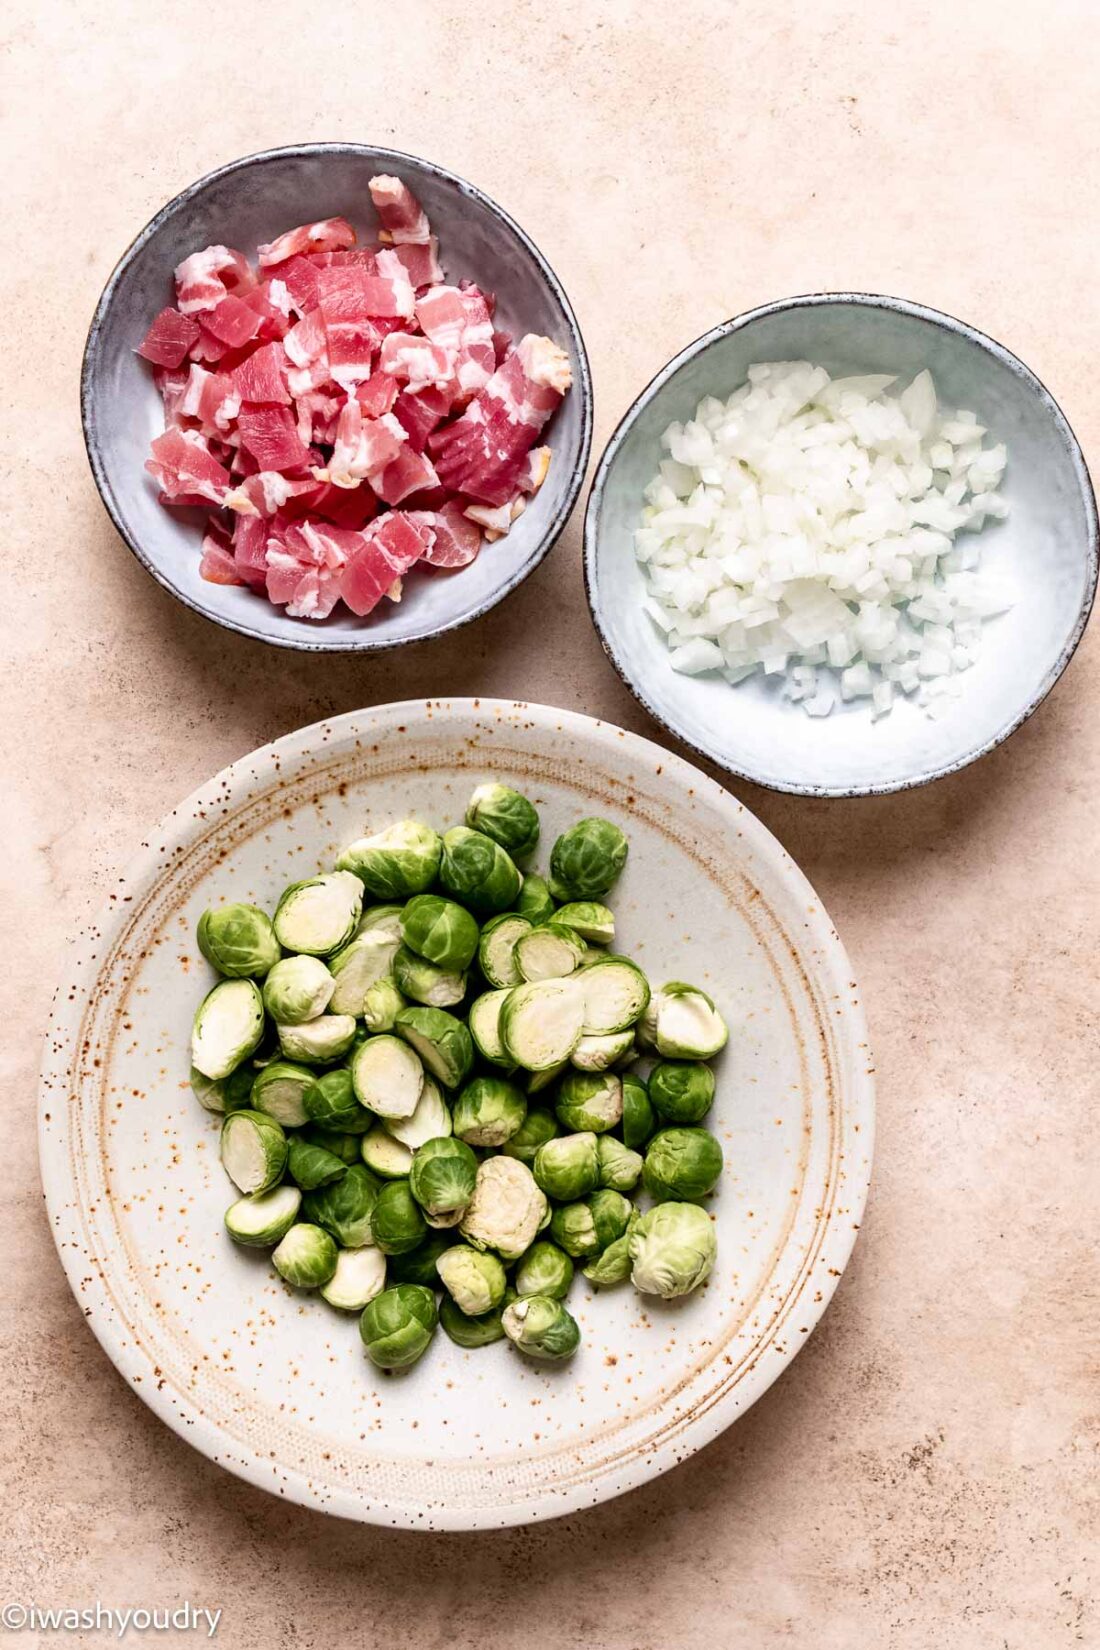 Ingredients for bacon and brussels sprouts in bowls on marble countertop. 